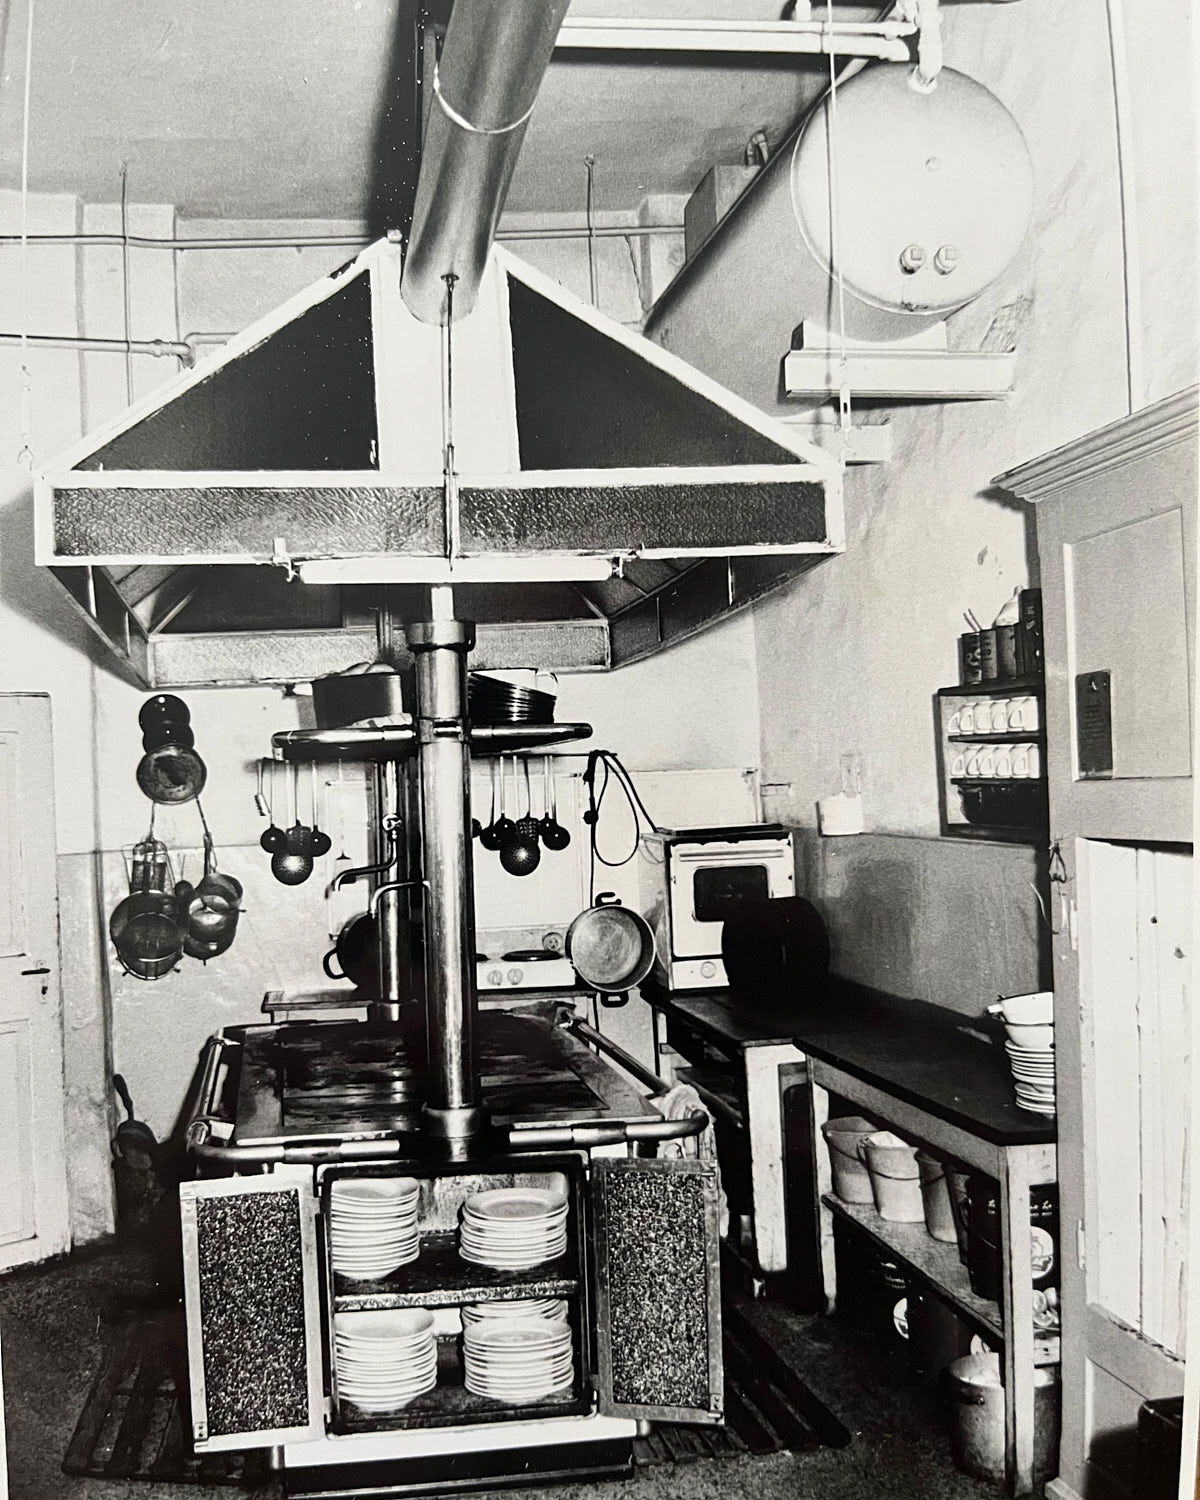 Old picture of the fink kitchen